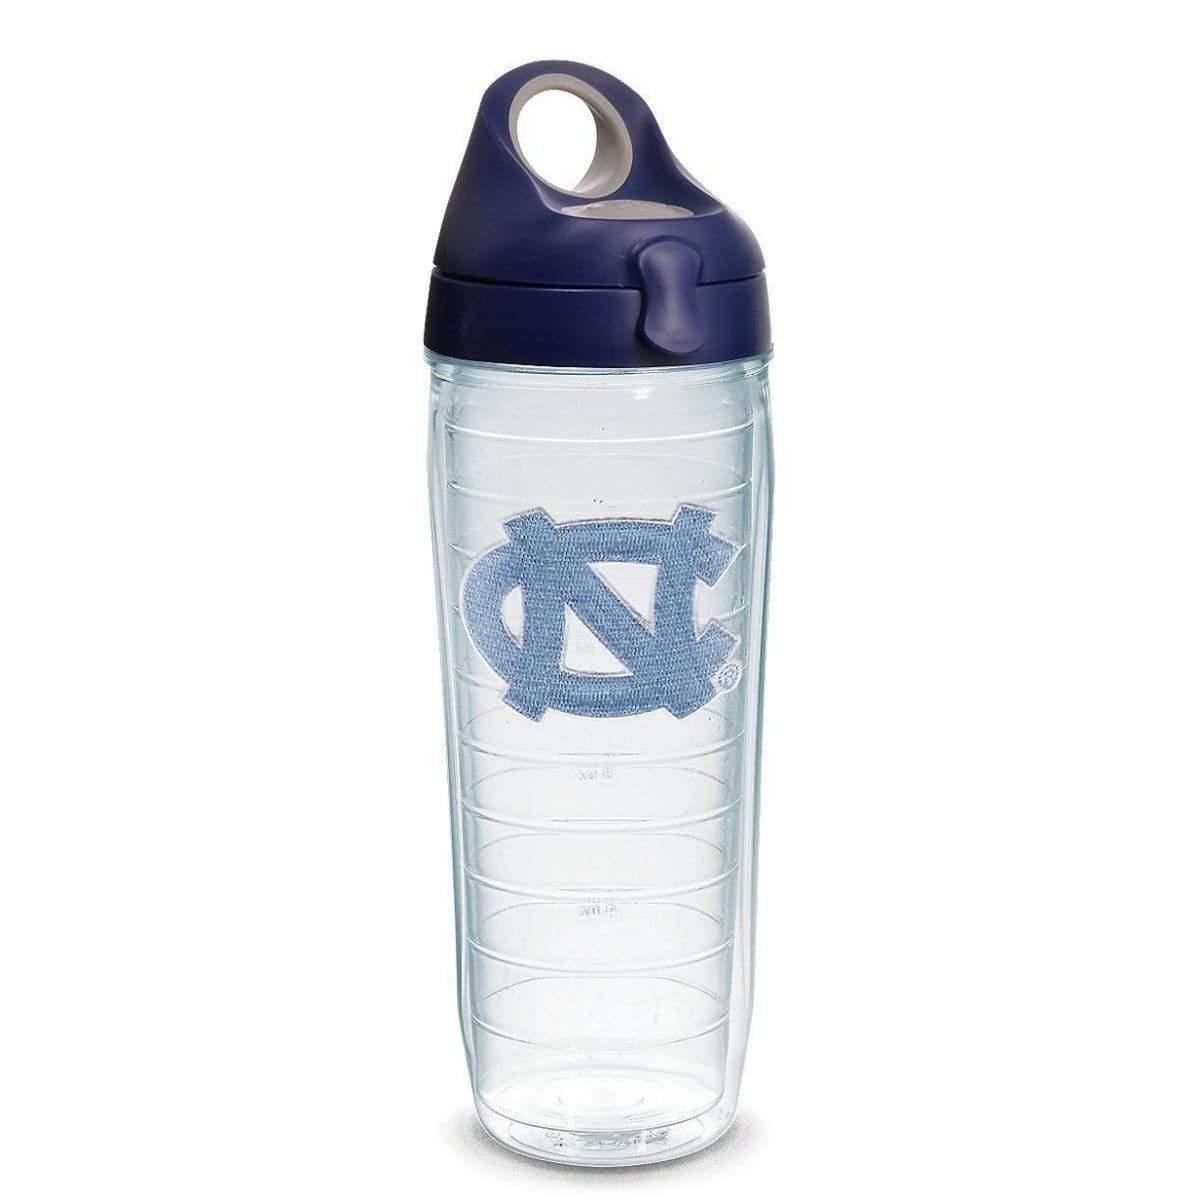 Tervis Tumbler University of North Carolina Water Bottle with Navy Lid